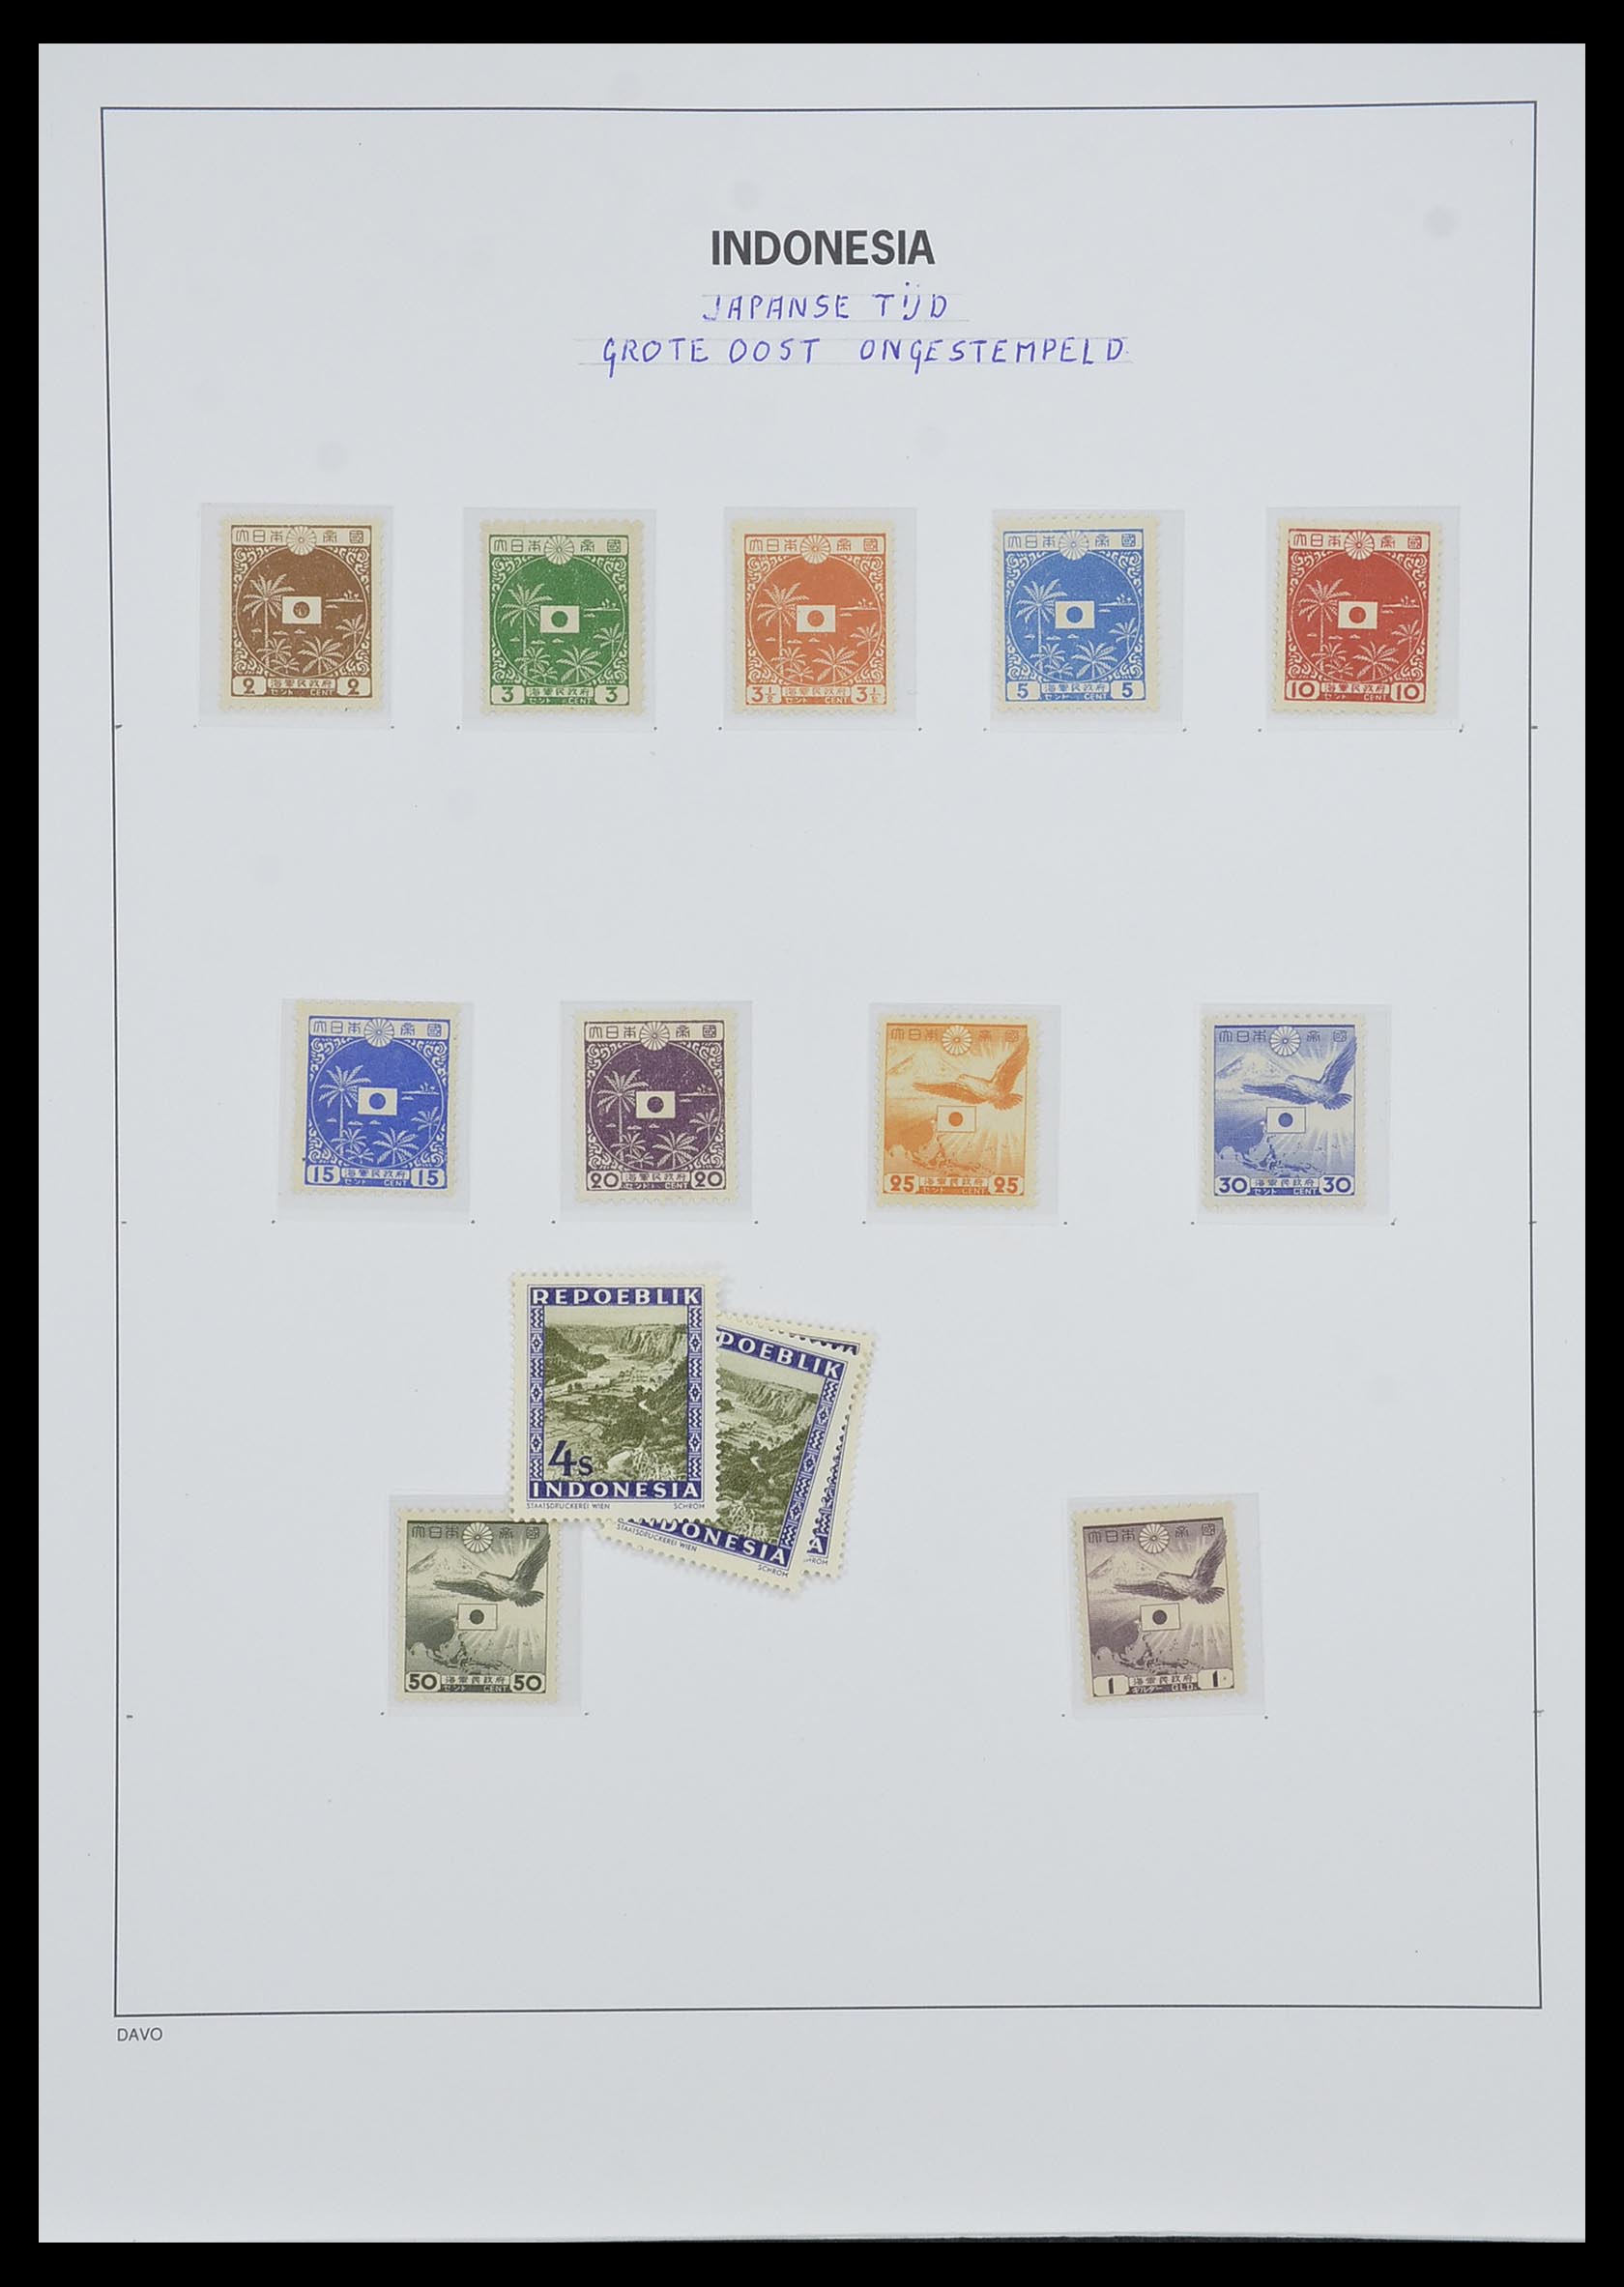 33988 005 - Stamp collection 33988 Vienna printings Indonesia.